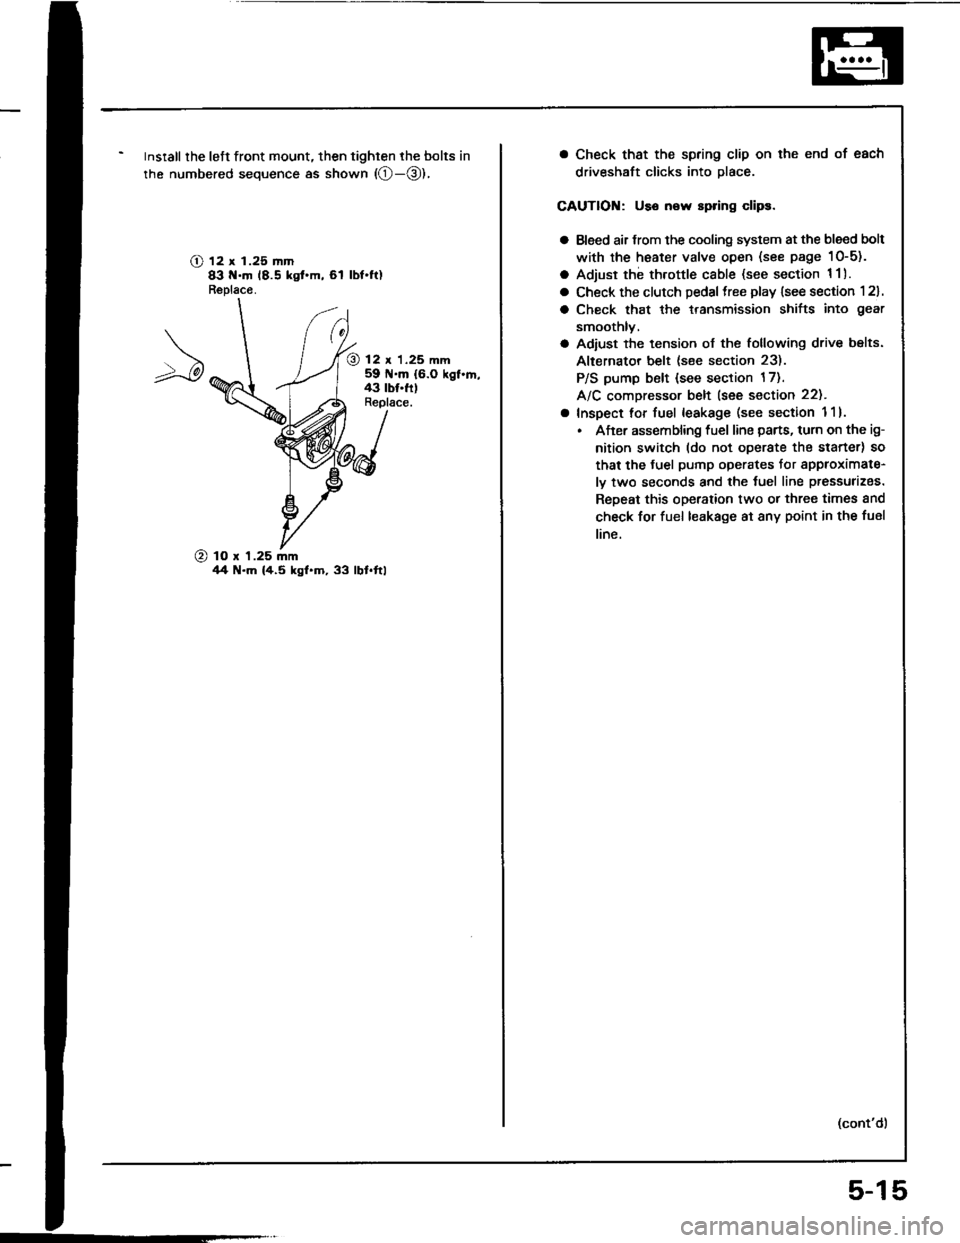 ACURA INTEGRA 1994  Service Repair Manual Insrall the left front mount, then tighten the bolts in
the numbered sequence as shown (O-@),
O 12 x 1.25 ]n]n83 N.m 18.5 kst.m,61 lbt.ftlReplace.
@ 12 r 1.25 mm59 N.m {6.0 kgl.n,43 tb{.ftlReplace.
@ 